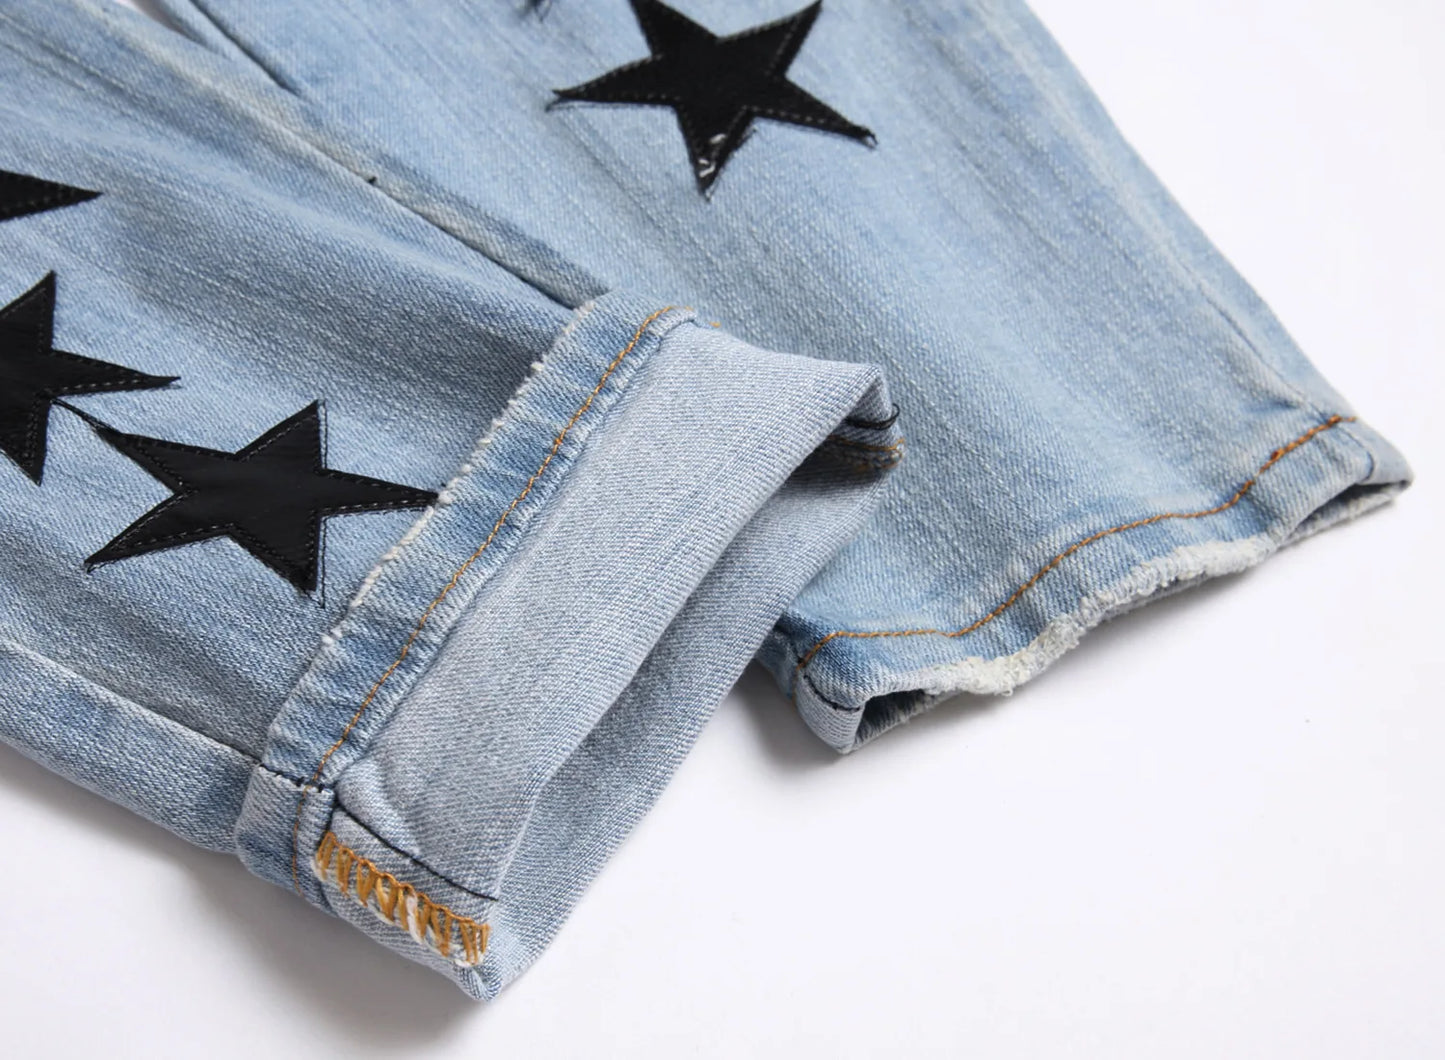 High Quality Men’s Slim-fit Blue Jeans Embroidery Stylish , Street Jeans